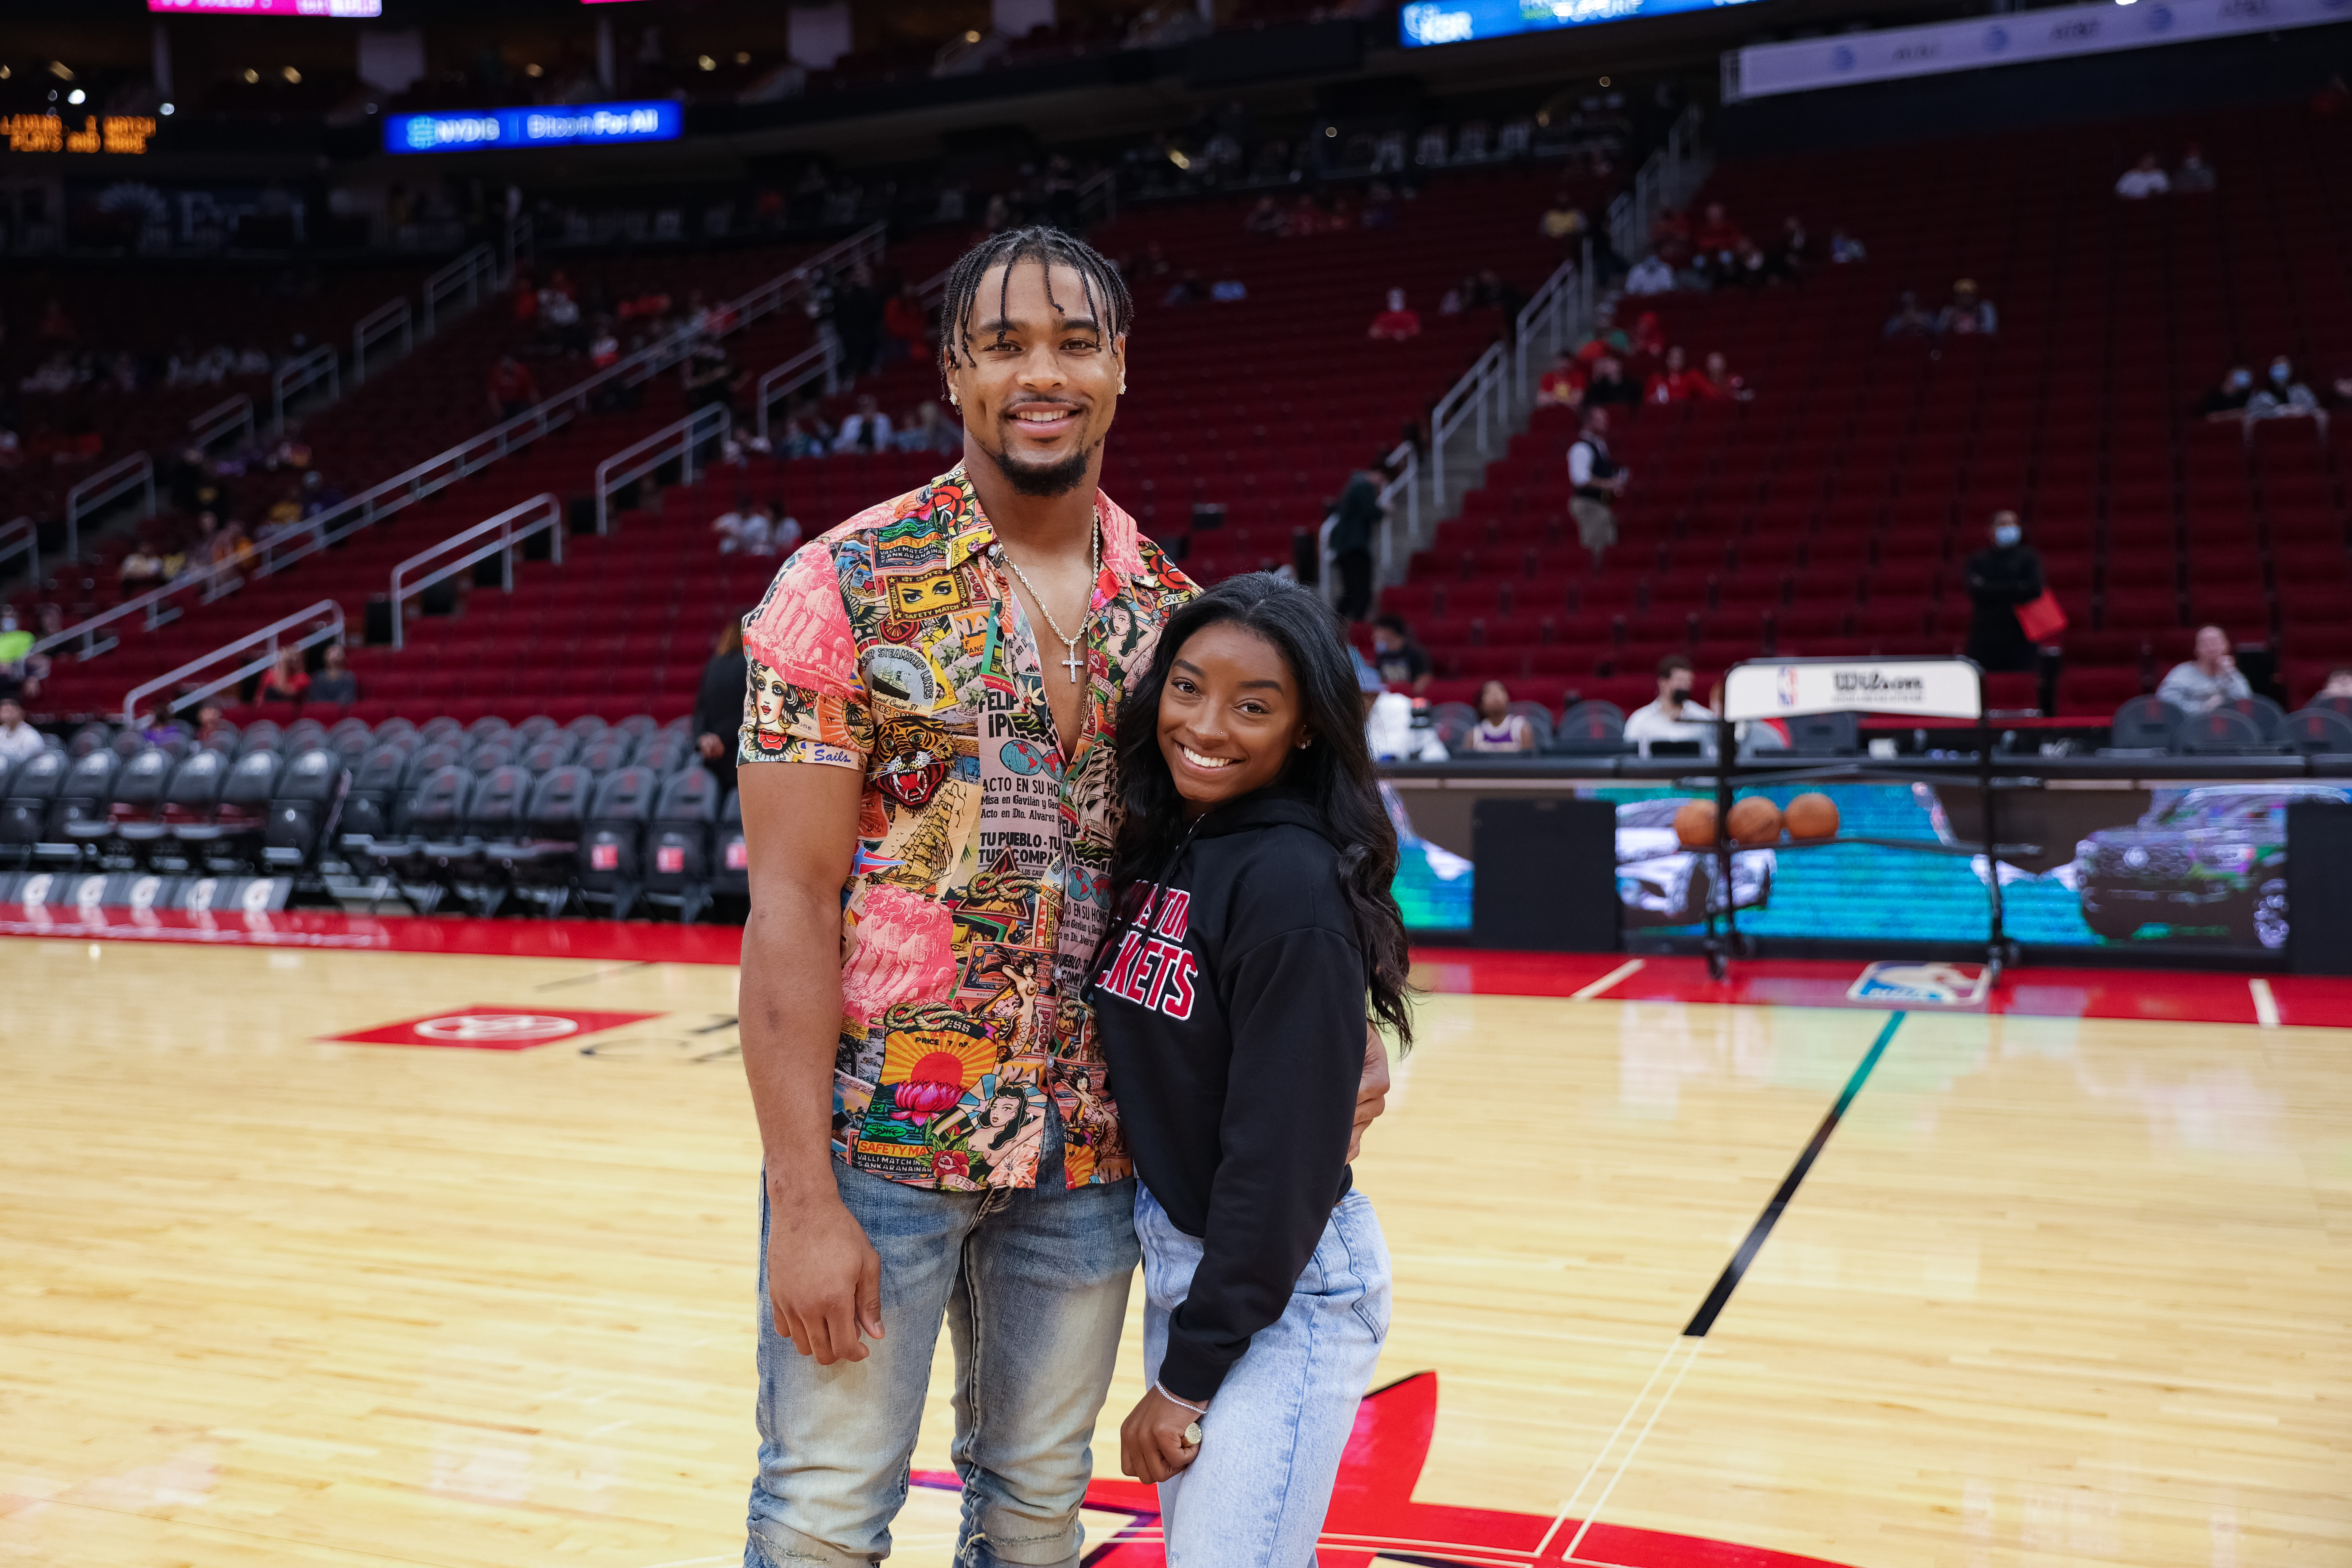 Simone Biles and Jonathan Owens at the Houston Rockets vs. Los Angeles Lakers Game at the Toyota Center on December 28, 2021 in Houston, Texas. | Source: Getty Images